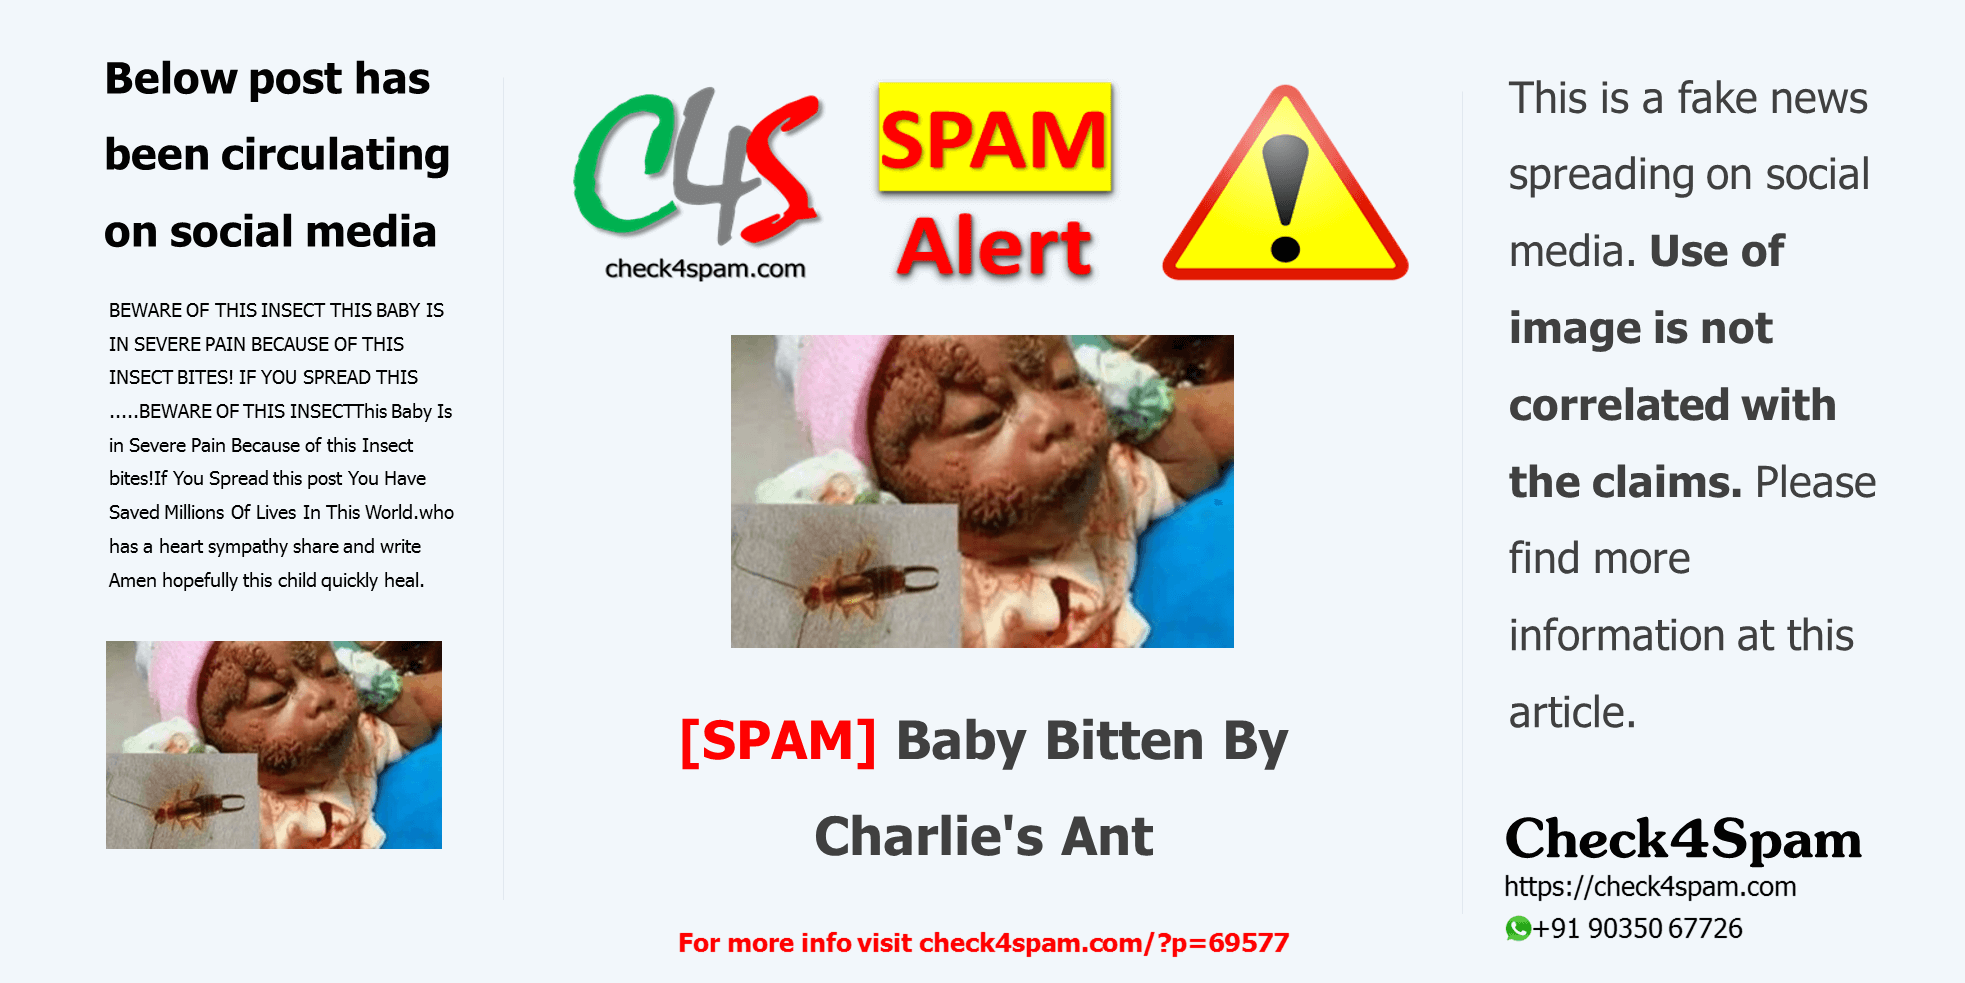 [SPAM] Baby Bitten By Charlie's Ant